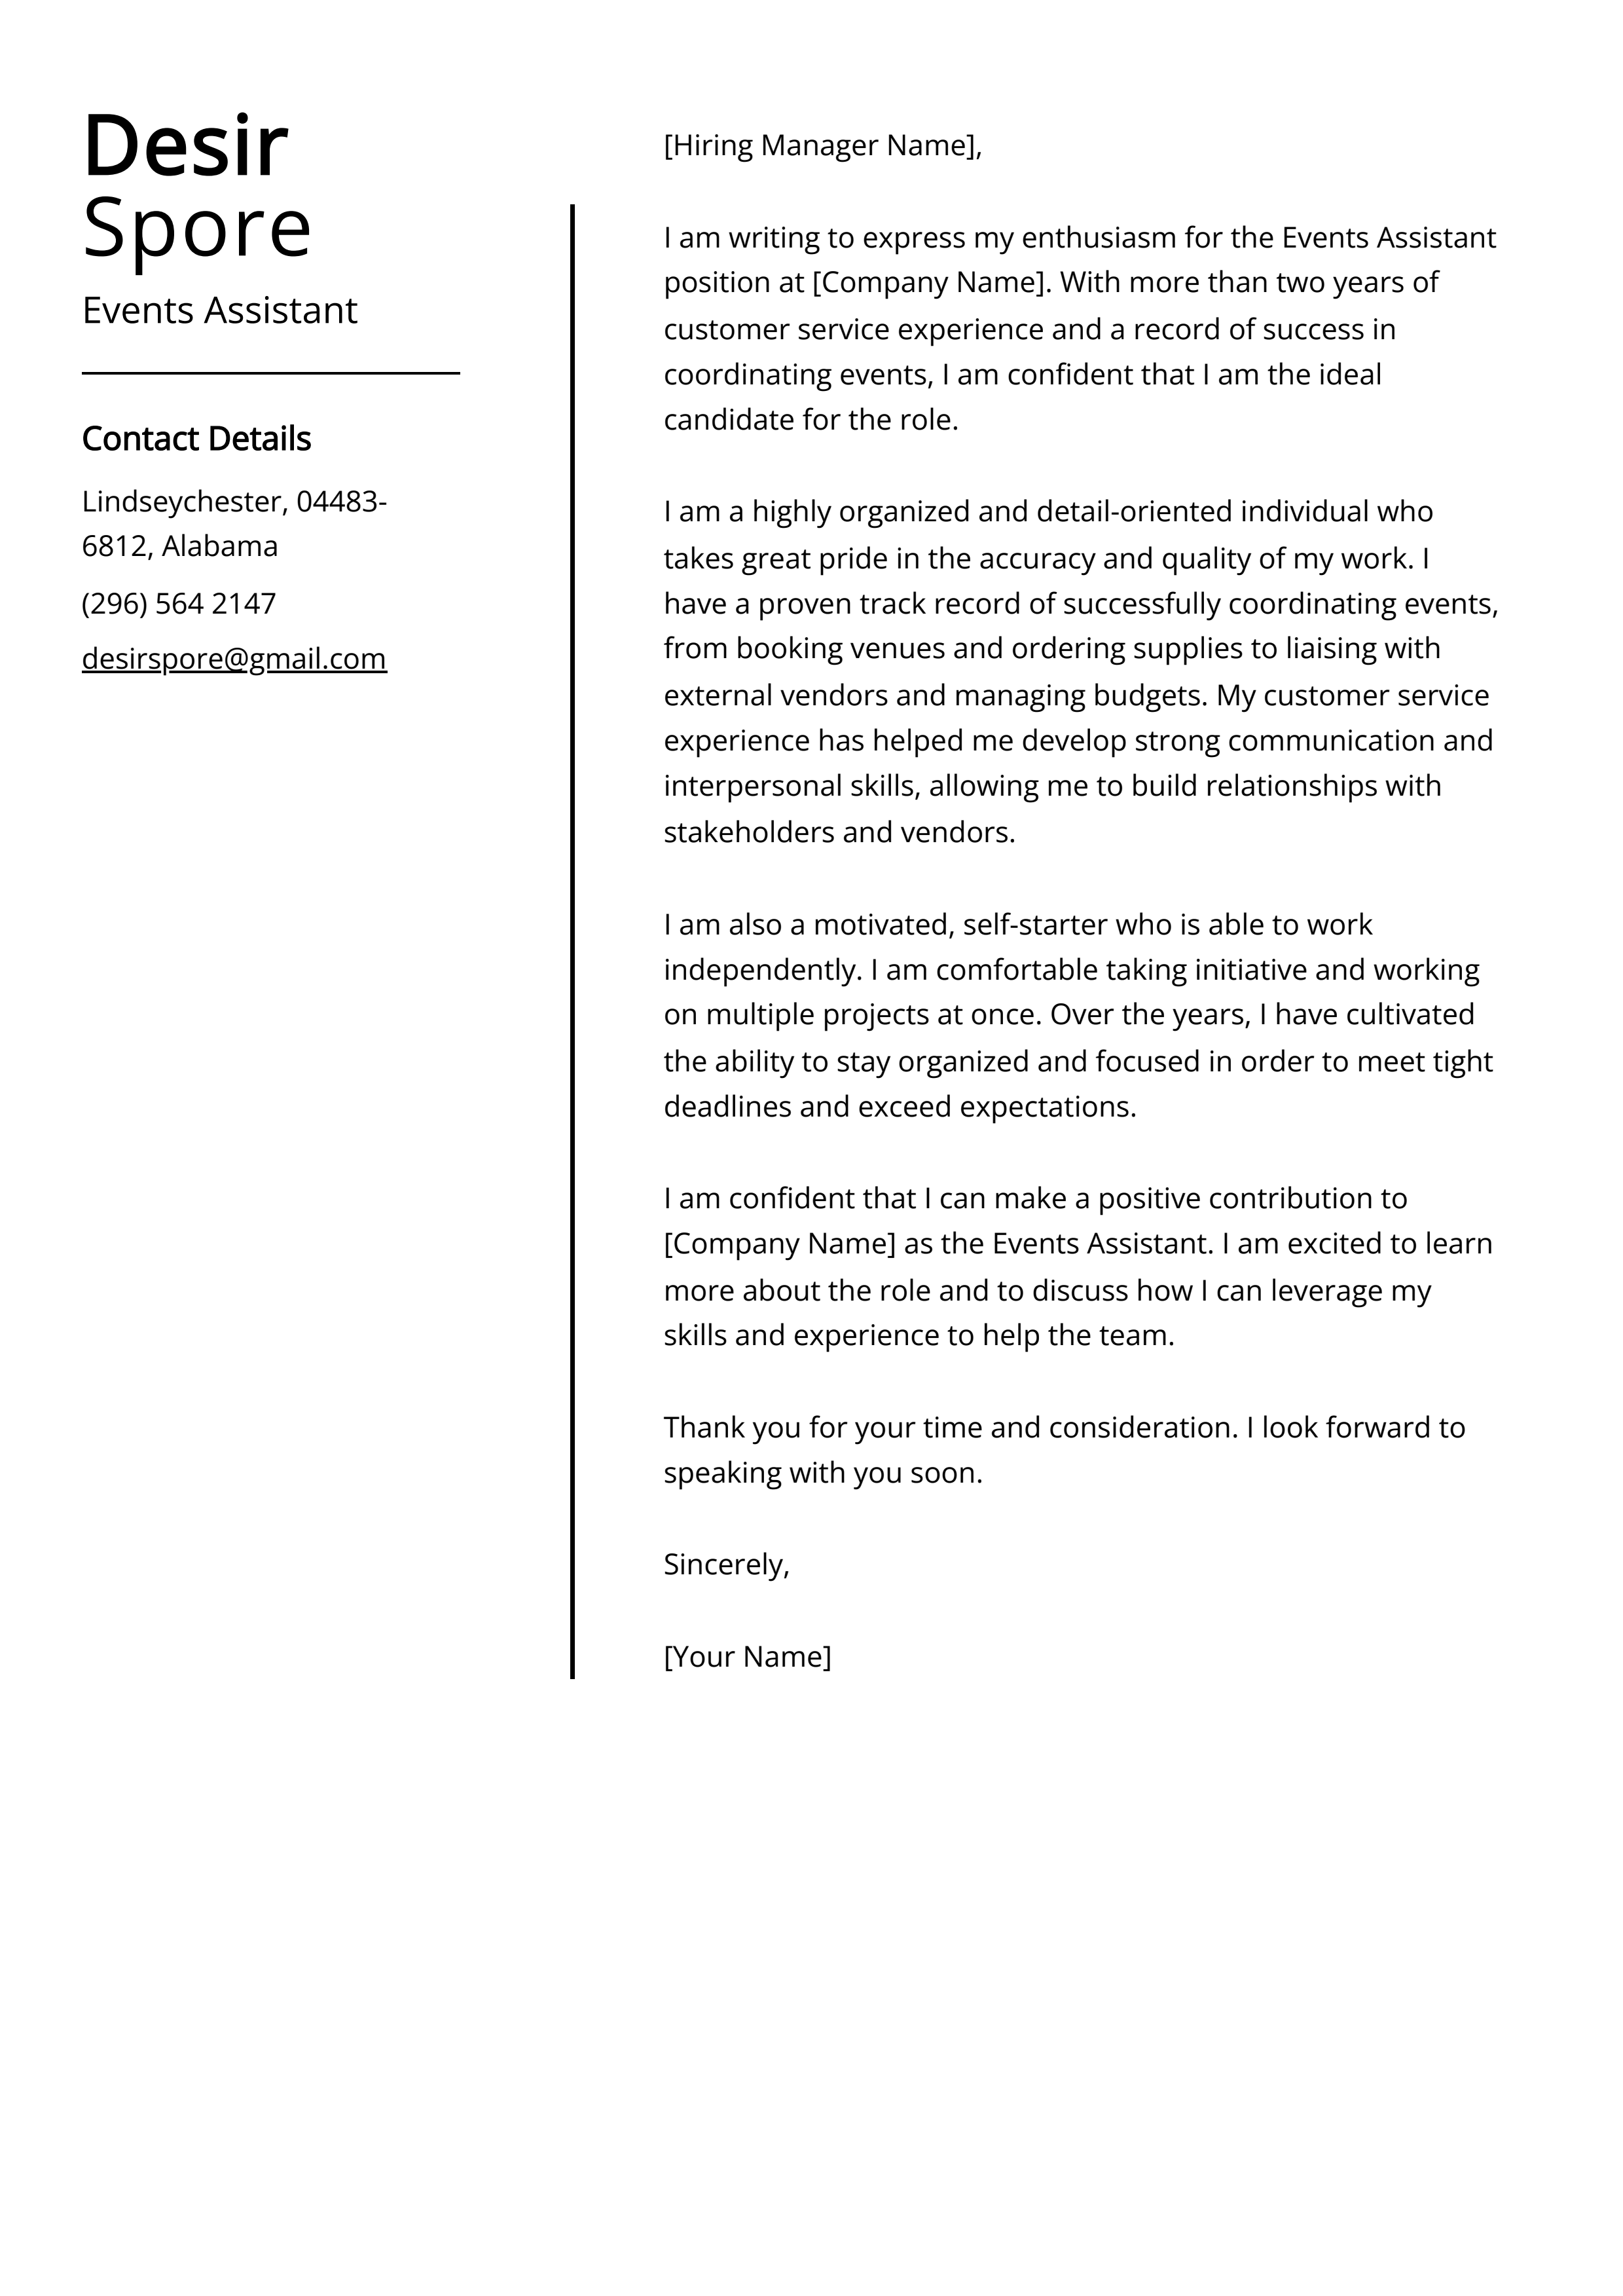 Events Assistant Cover Letter Example